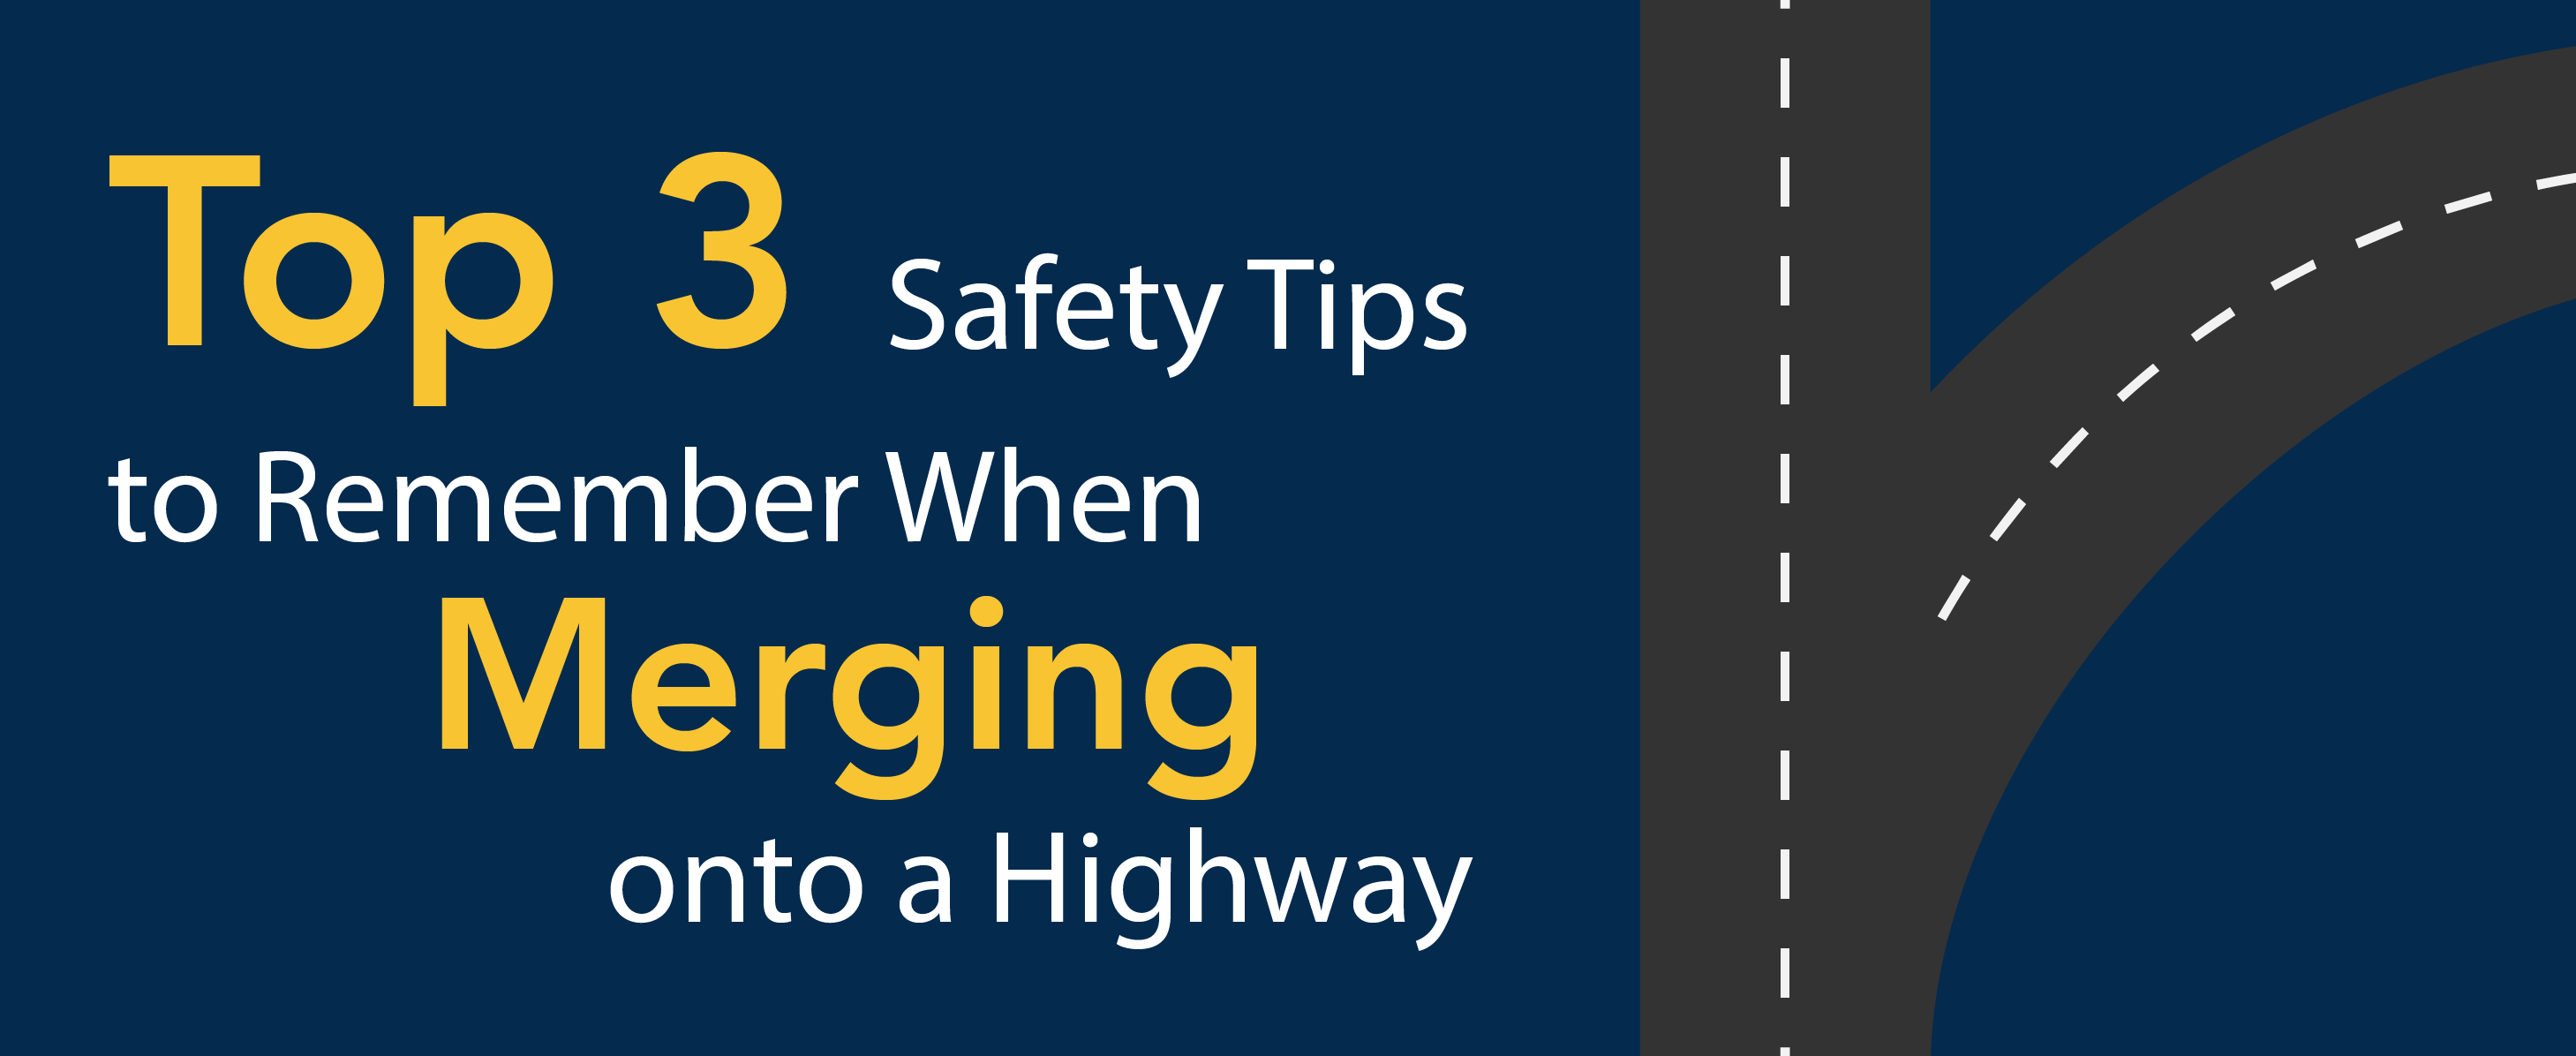 Top 3 safety tips to remember when merging onto a highway